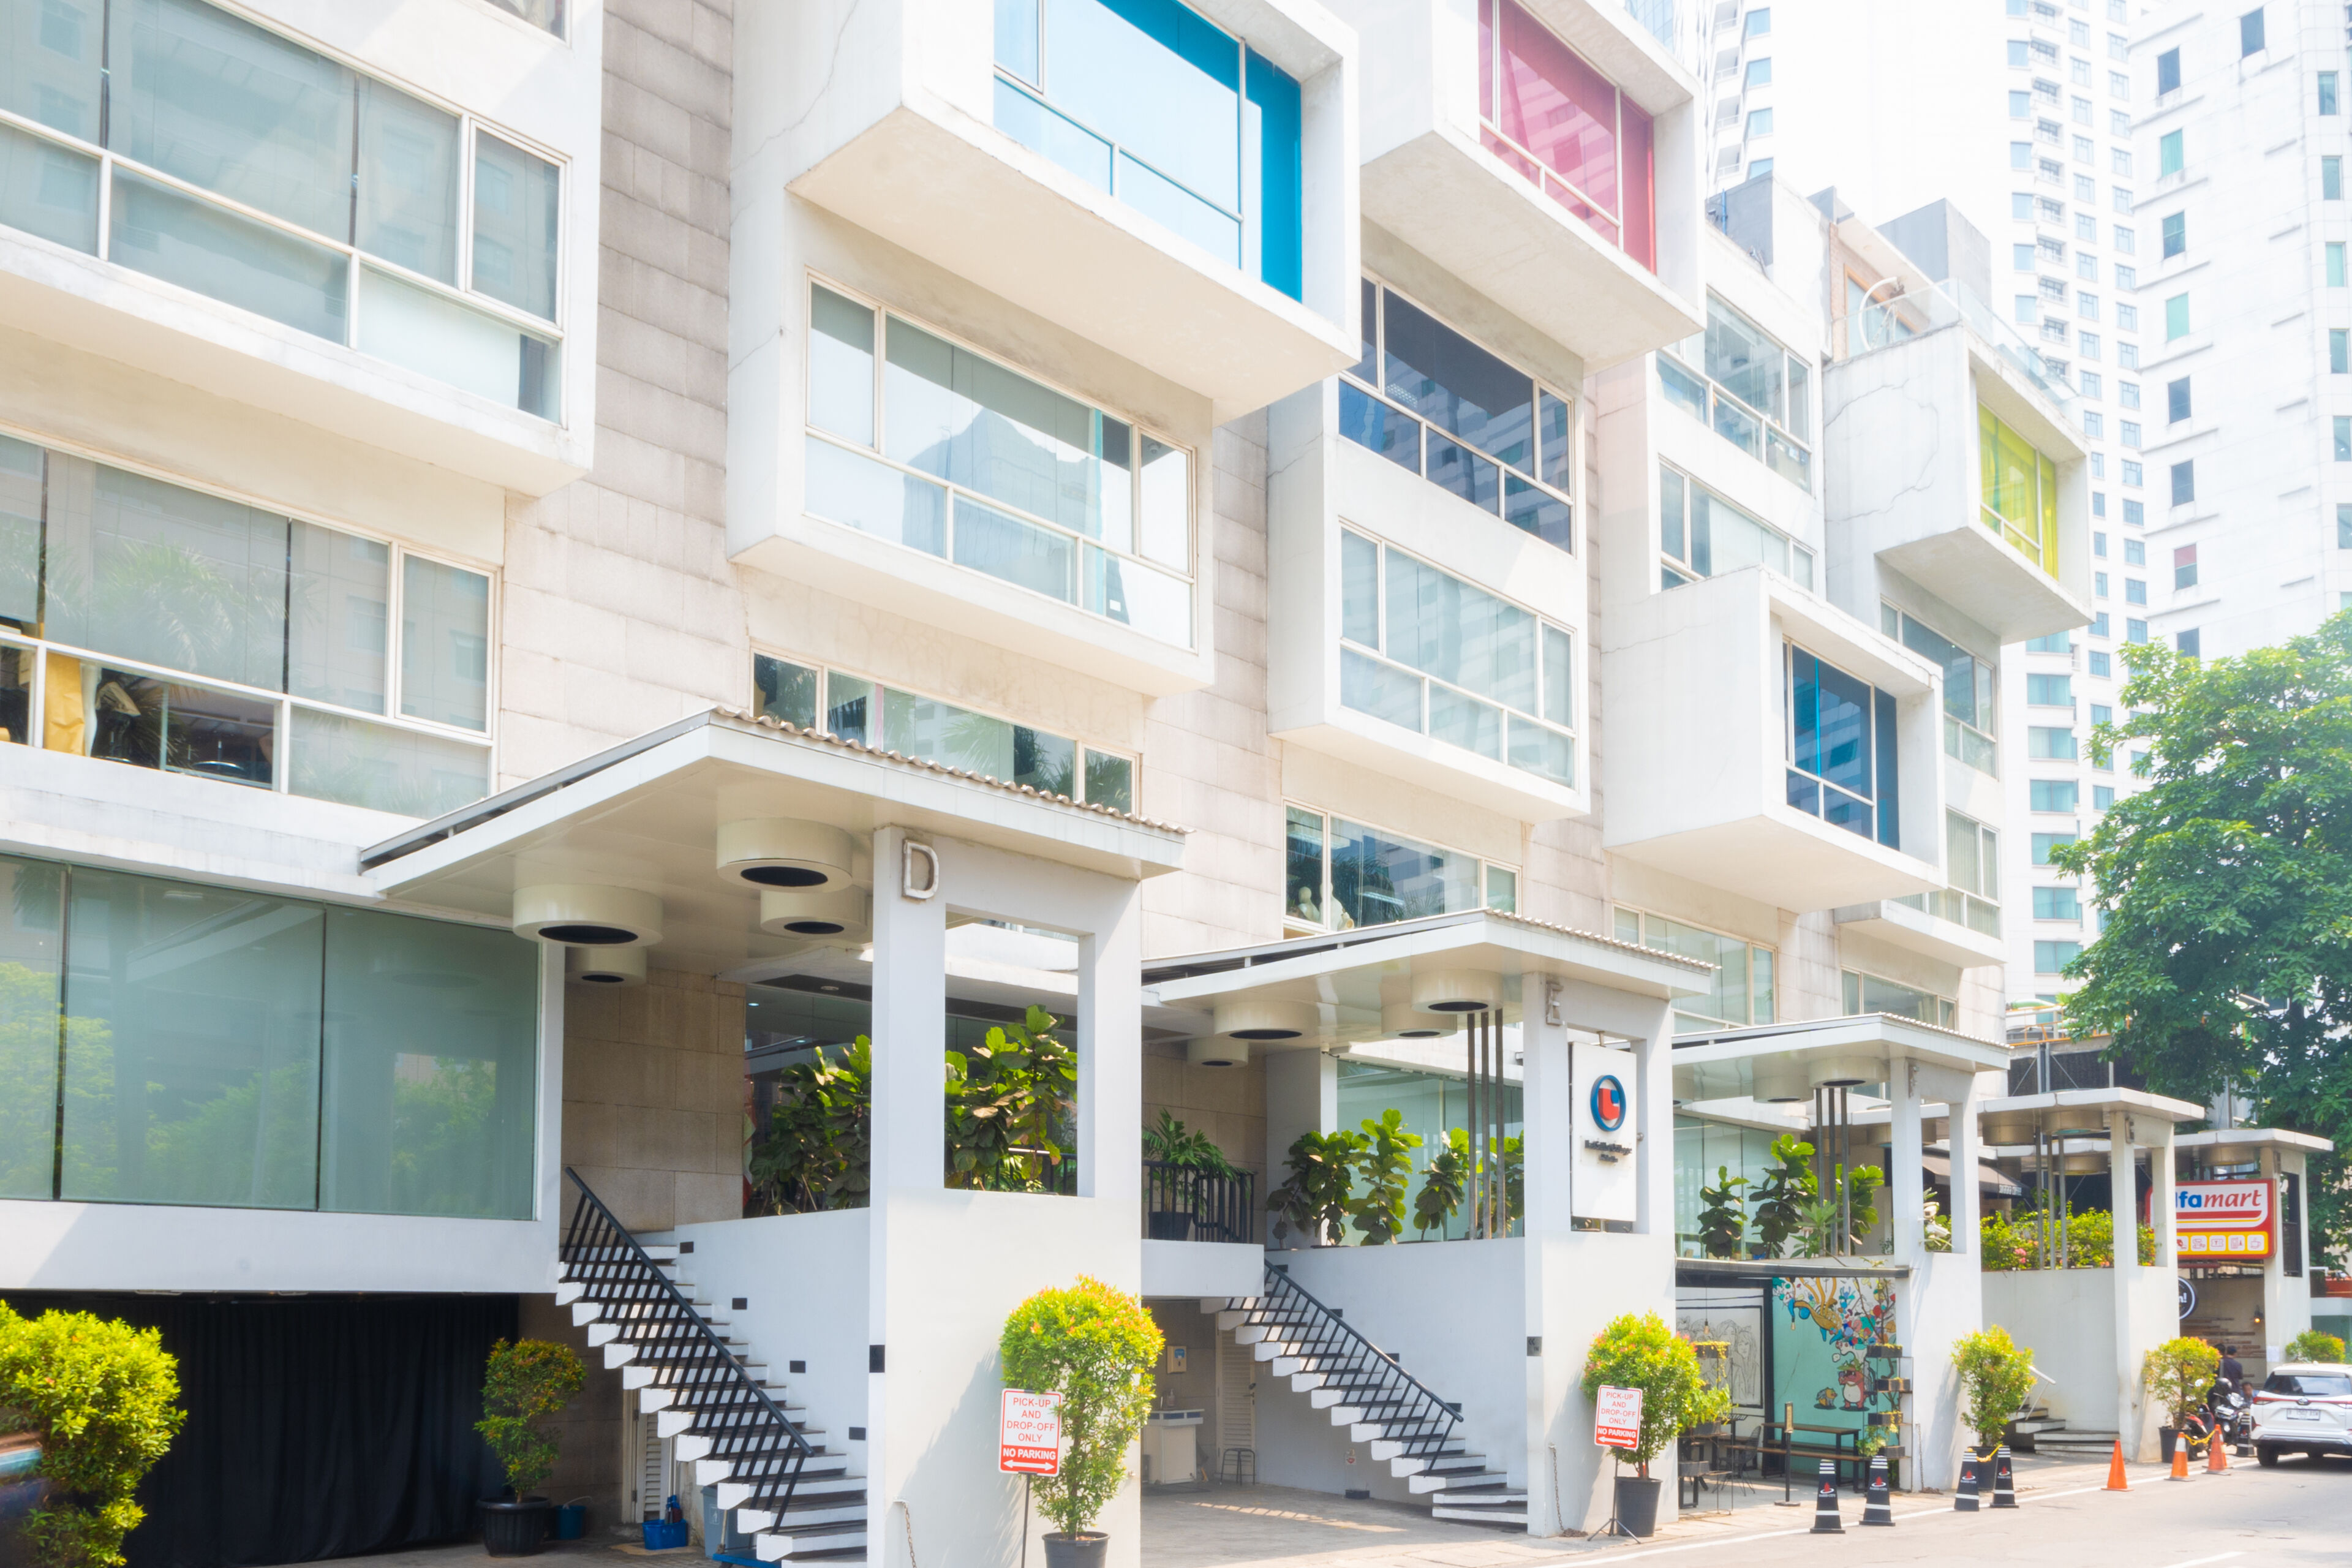 Contemporary architecture with balconies and vibrant colored accents on a bright sunny day.